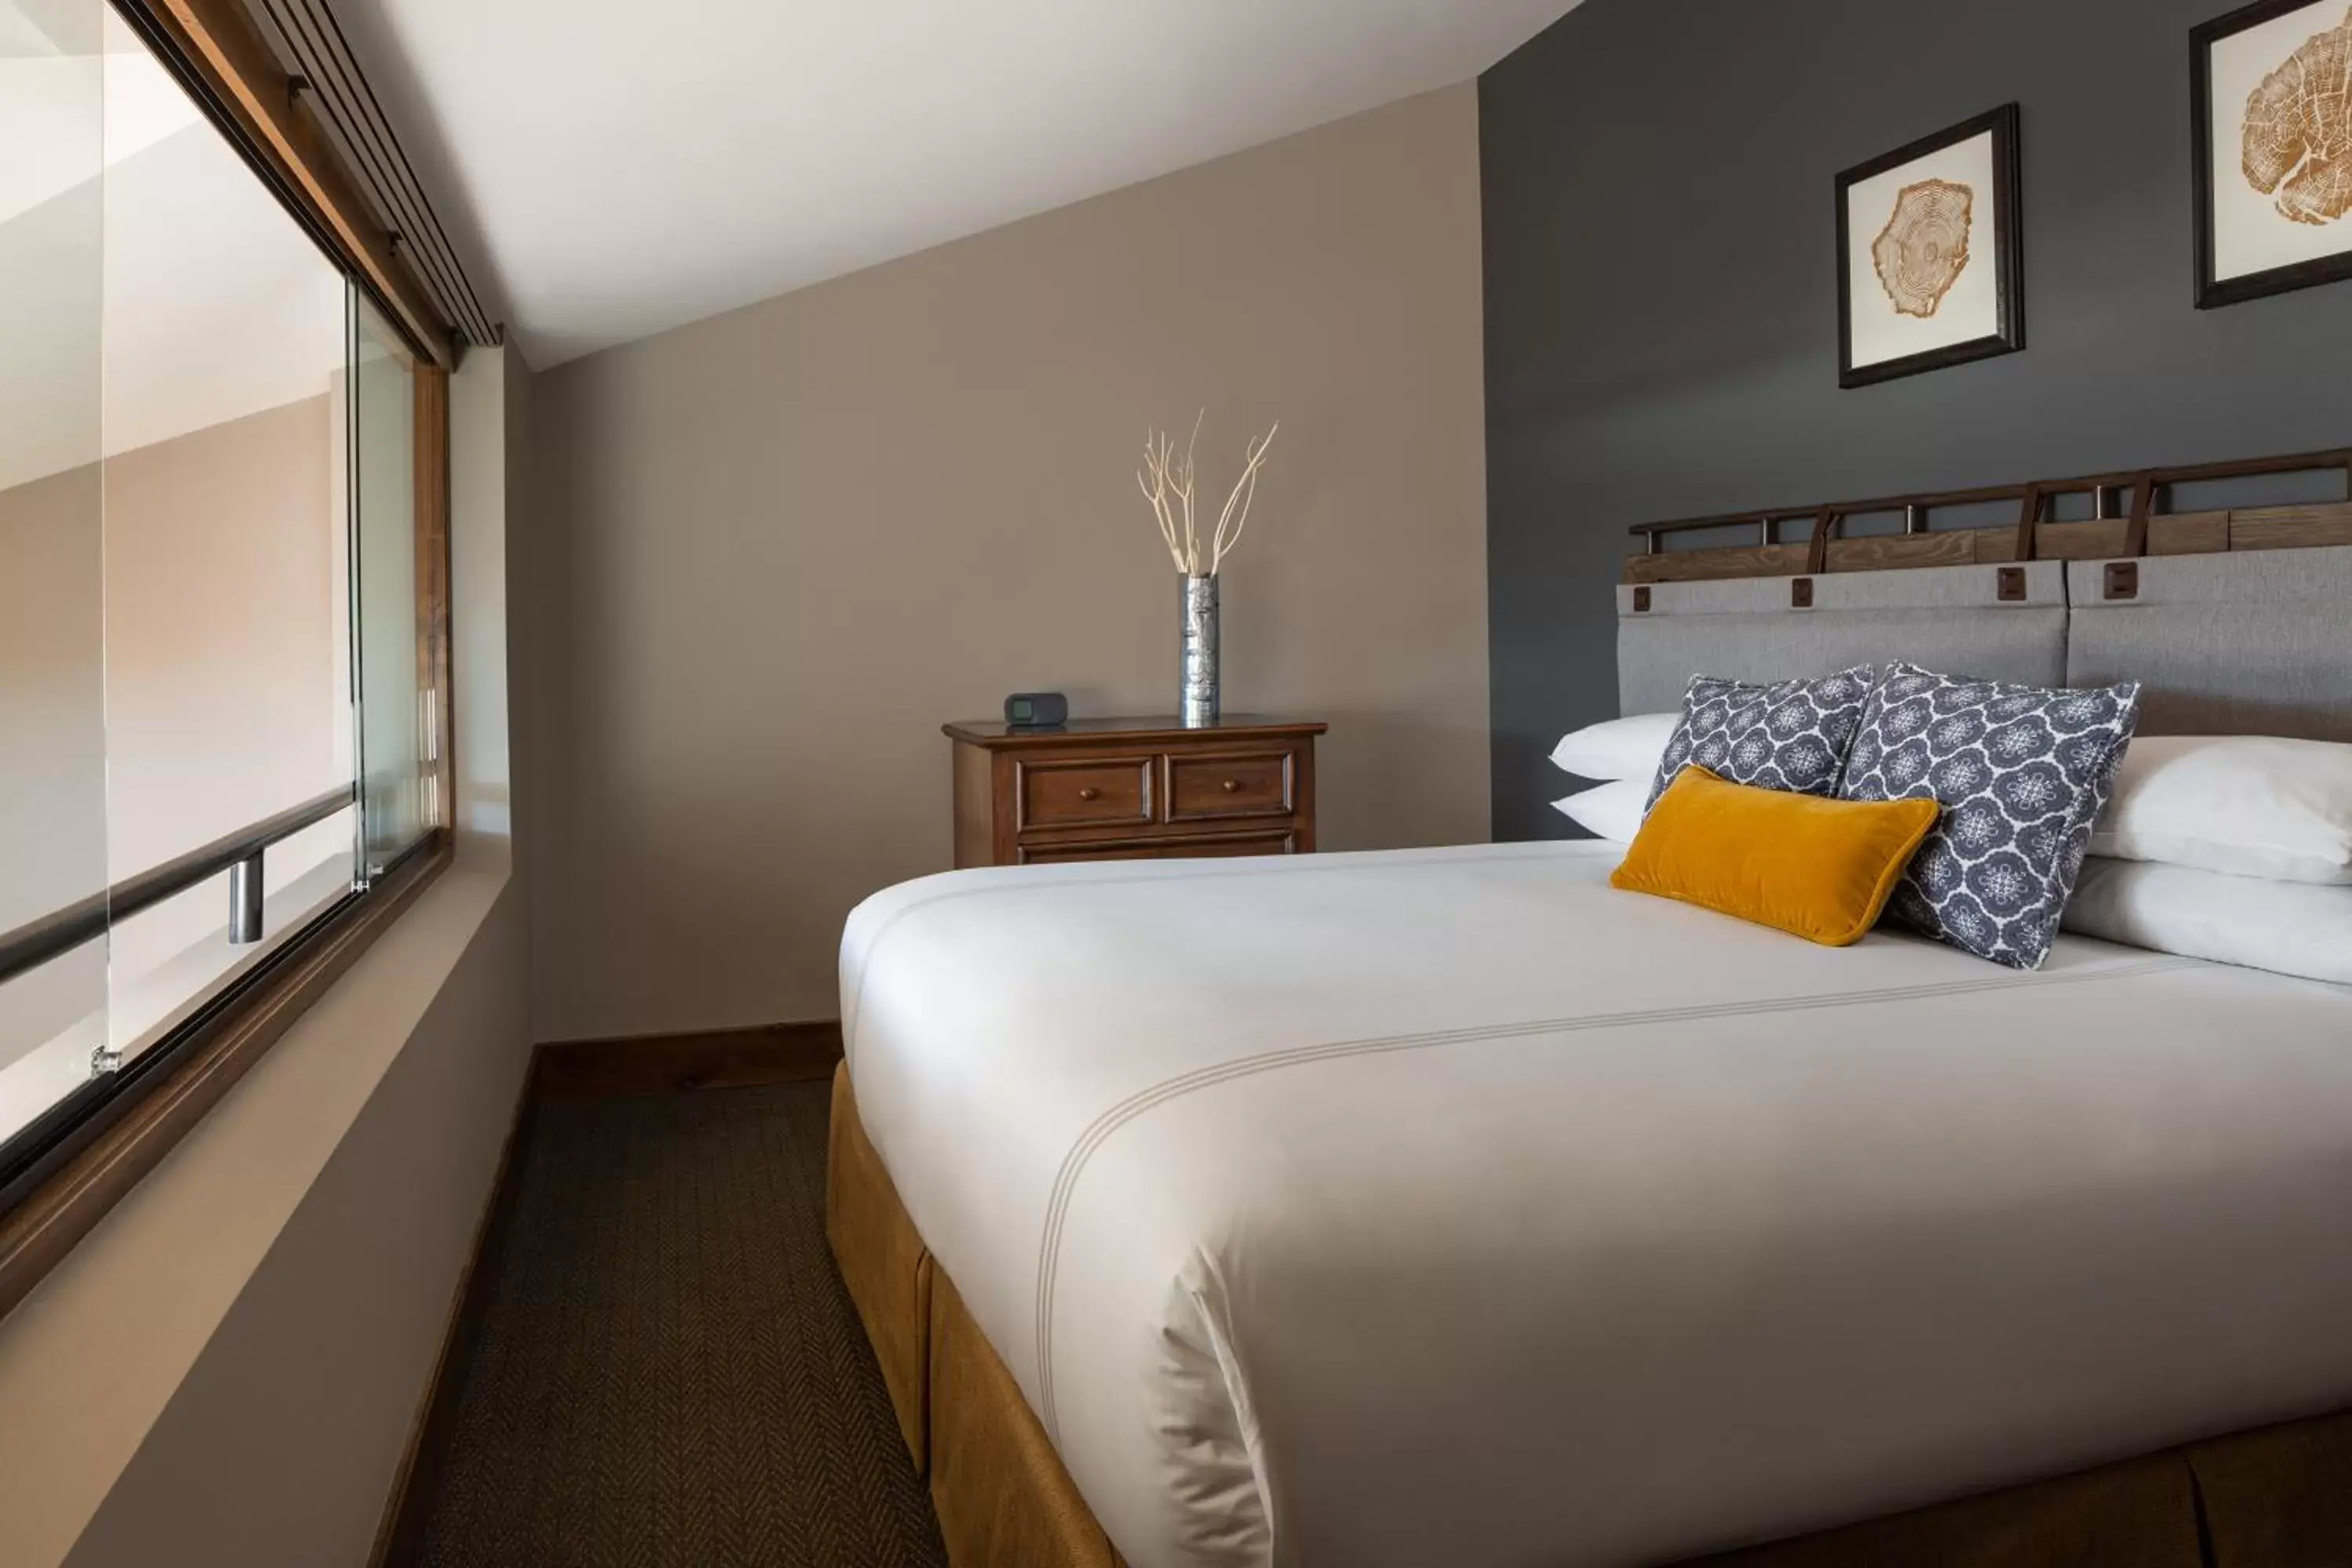 Bedroom, Bed in Teton Mountain Lodge and Spa, a Noble House Resort